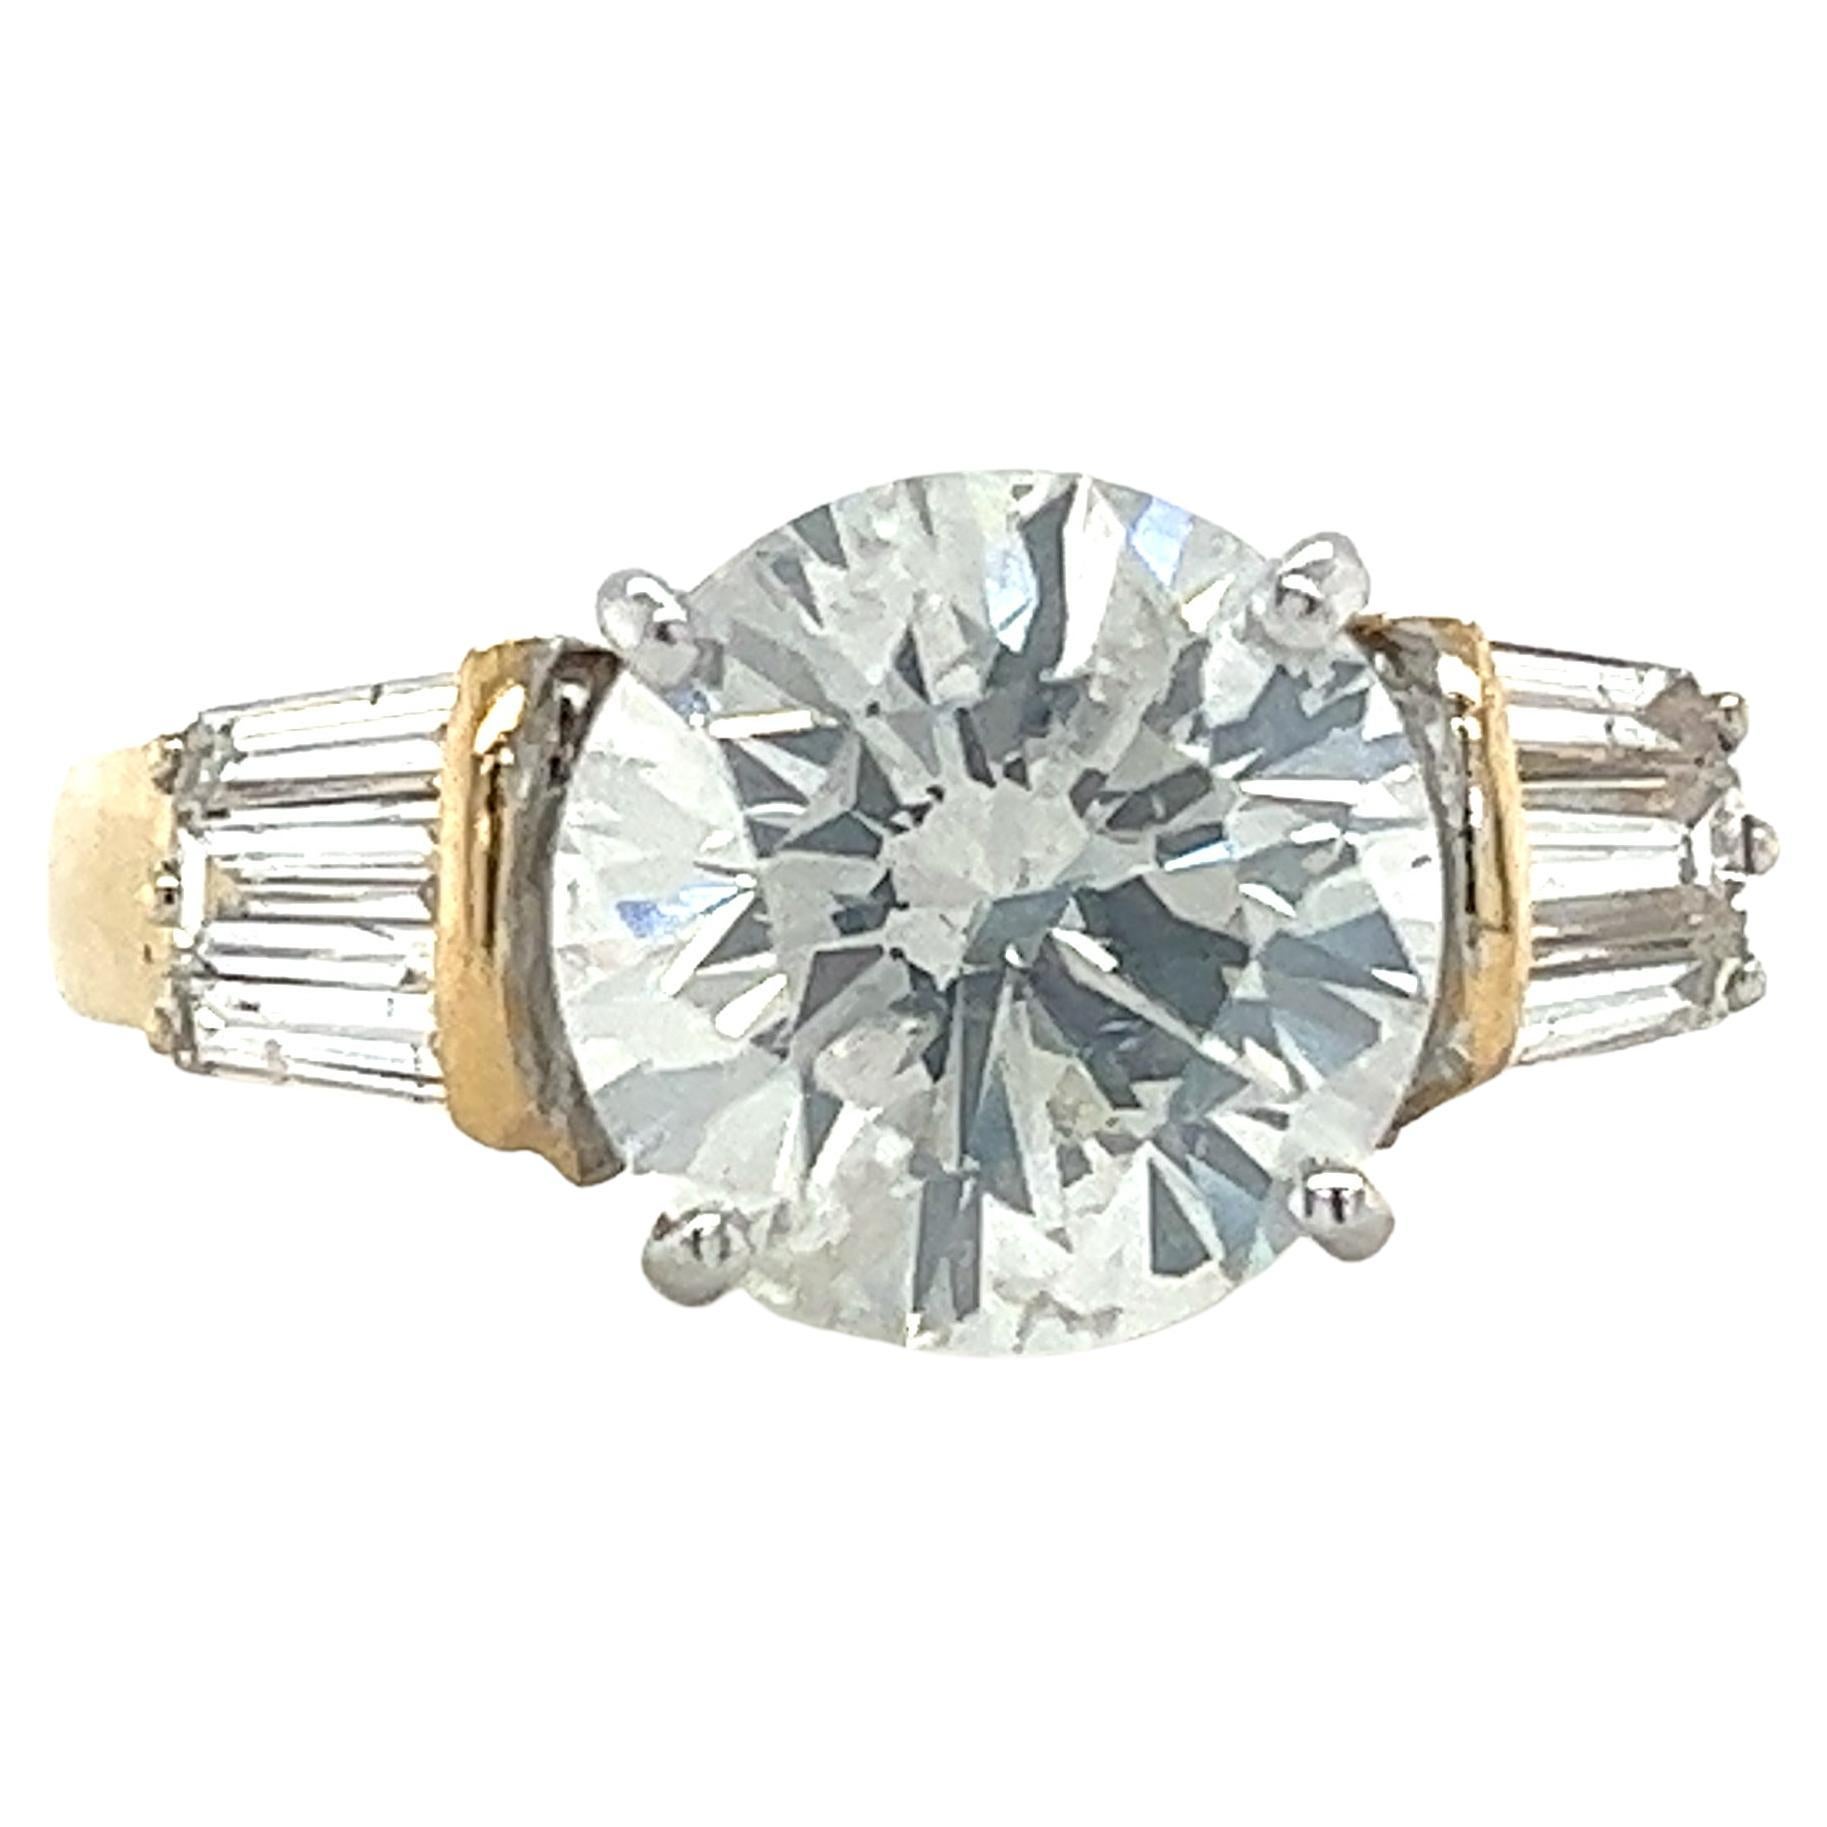 EGL certified 4.21 carat round cut natural diamond engagement ring. Set in a gorgeous two-tone 18k gold mounting. The center stone is adorned with 6 baguette-cut diamond side stones.

The center stone is a true bargain gem due to its details on